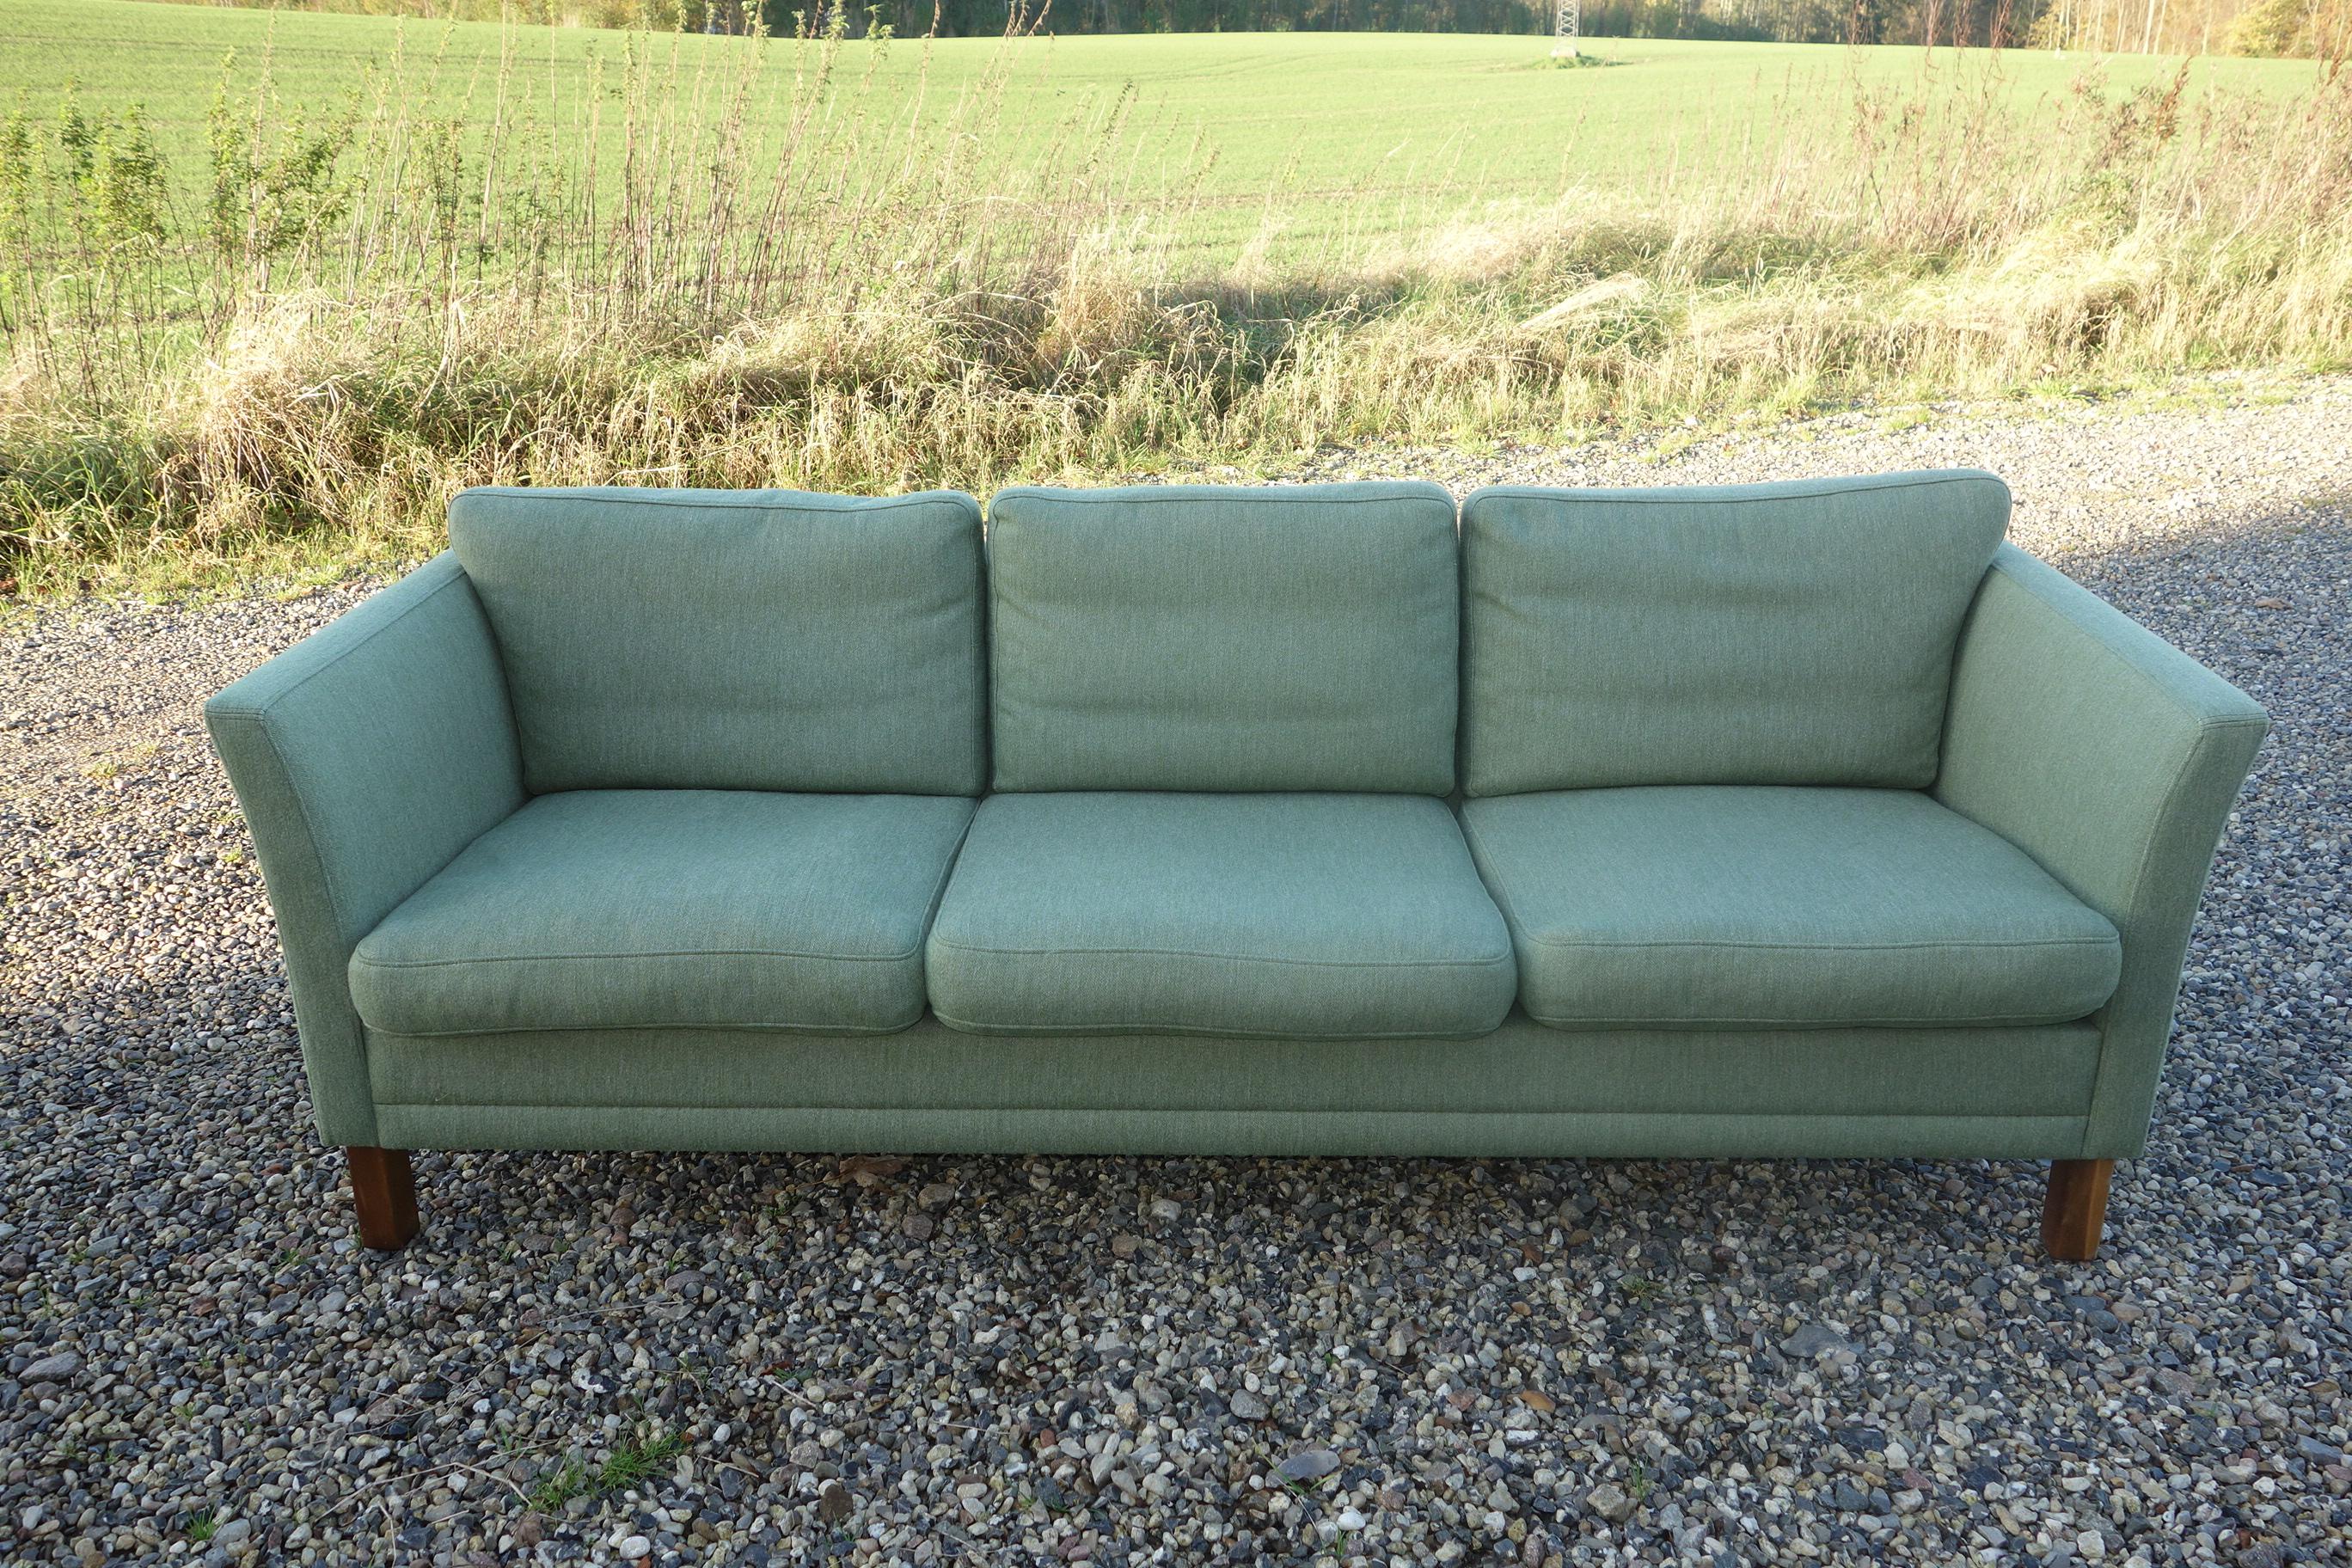 Danish sofa in Classic Børge Mogensen, Kaare Klint style. High quality hallingdal wool and down filling. Close to mint condition.